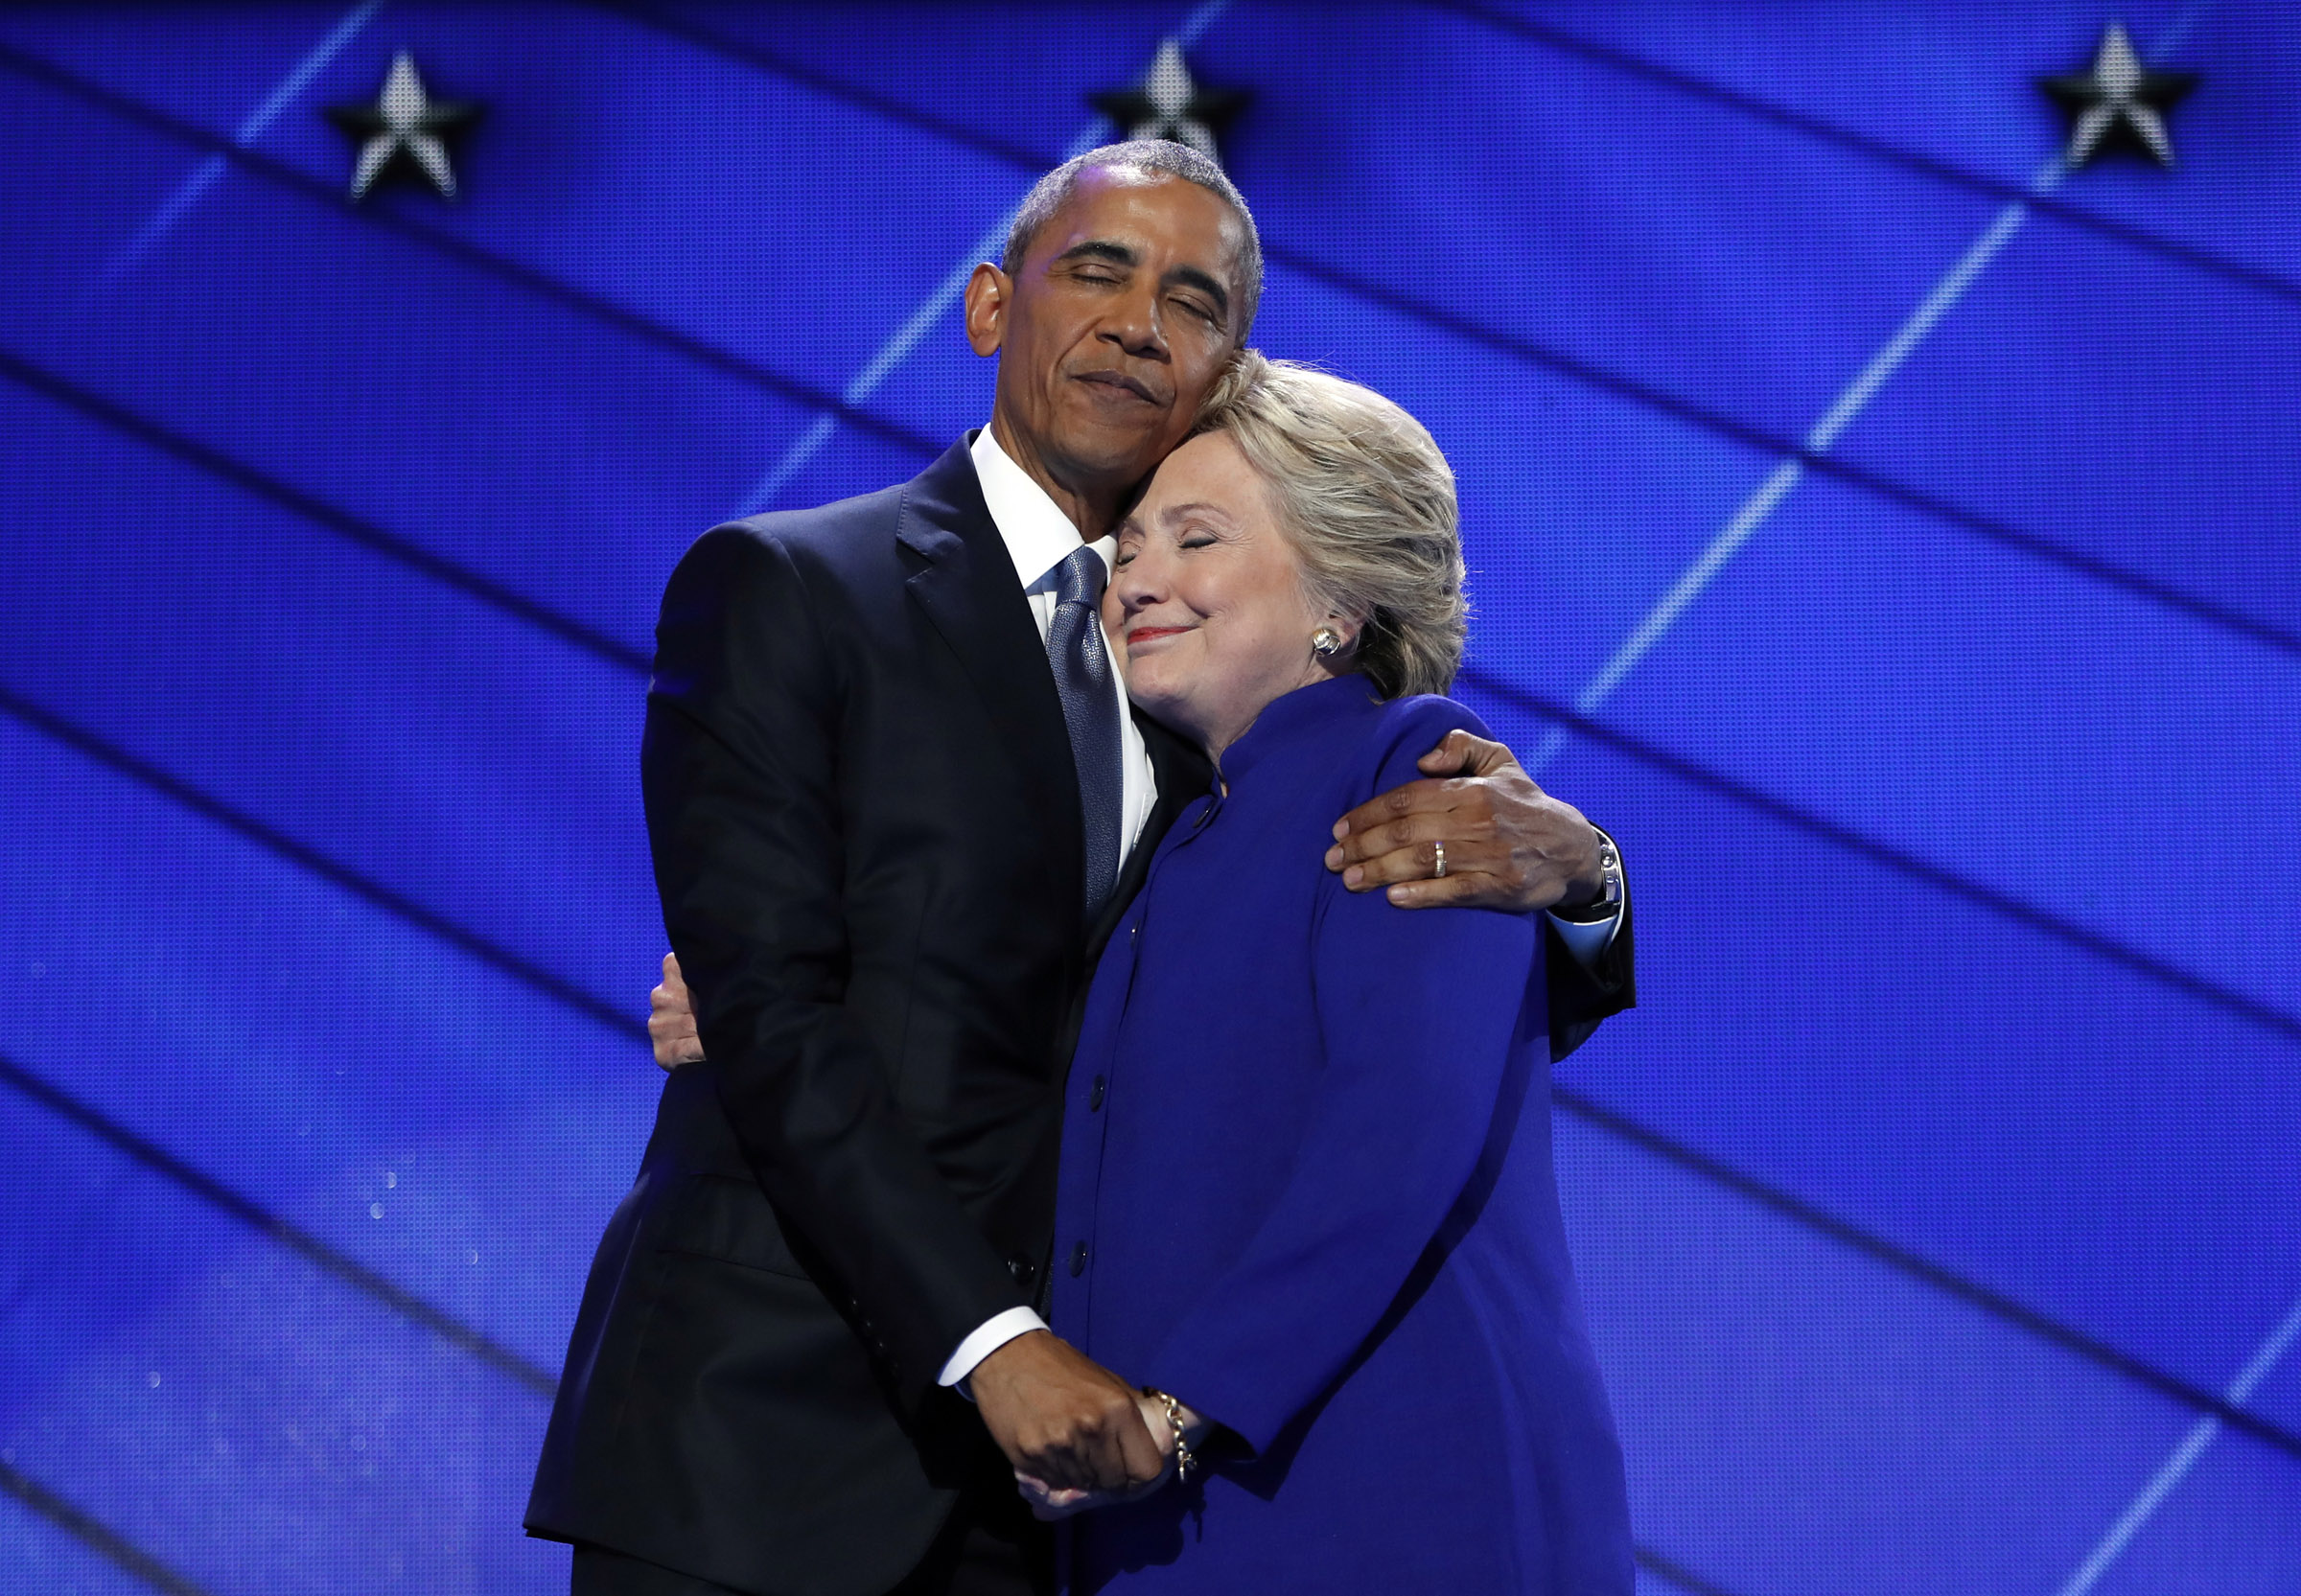 GALLERY: Democratic National Convention – Day 3